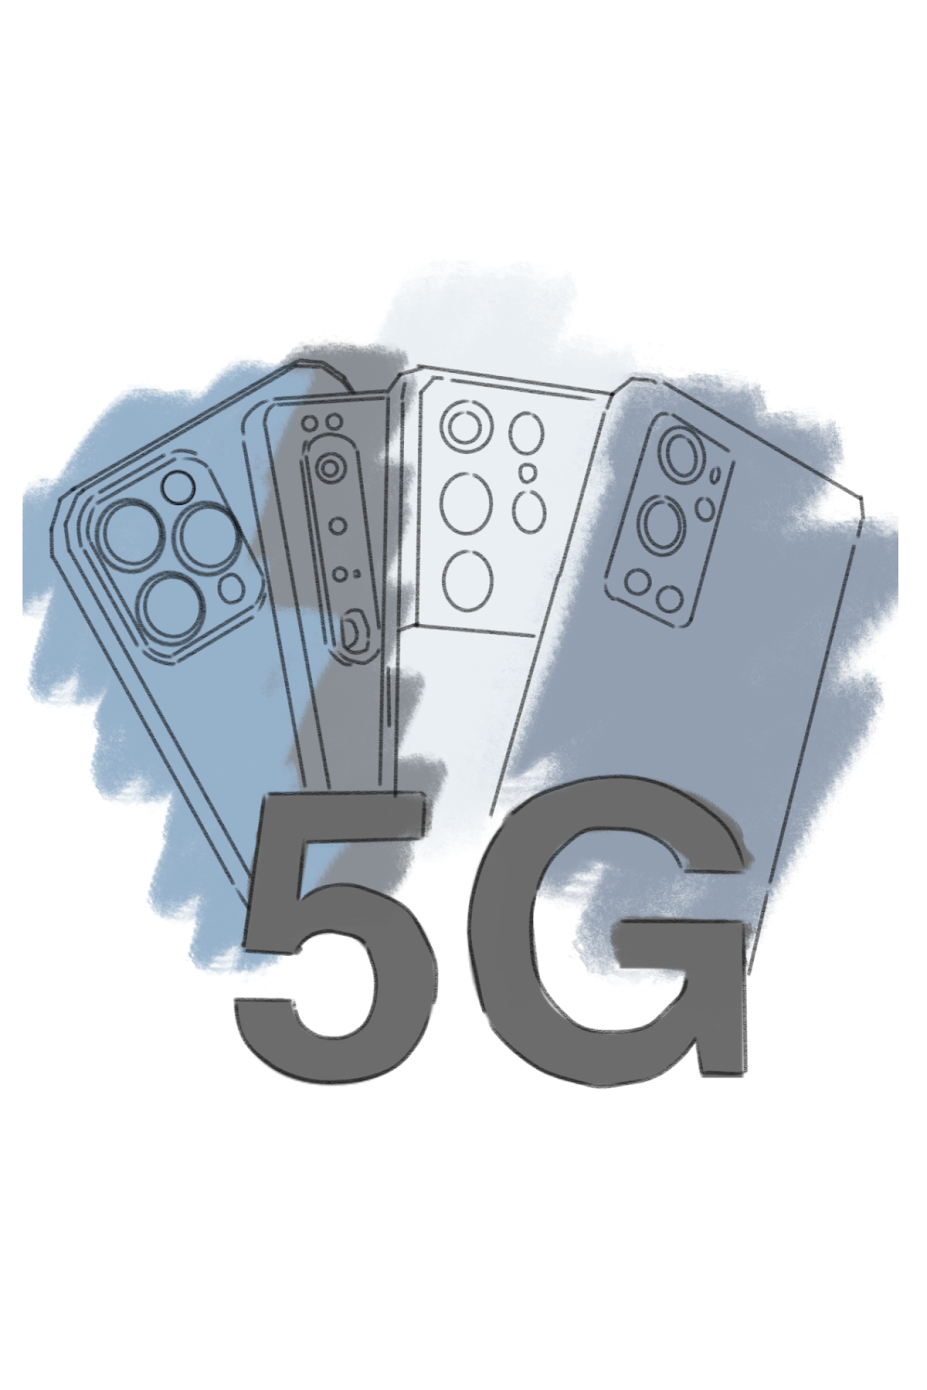 5G Network is usually used by cellular phones and advertised by many phone companies. 